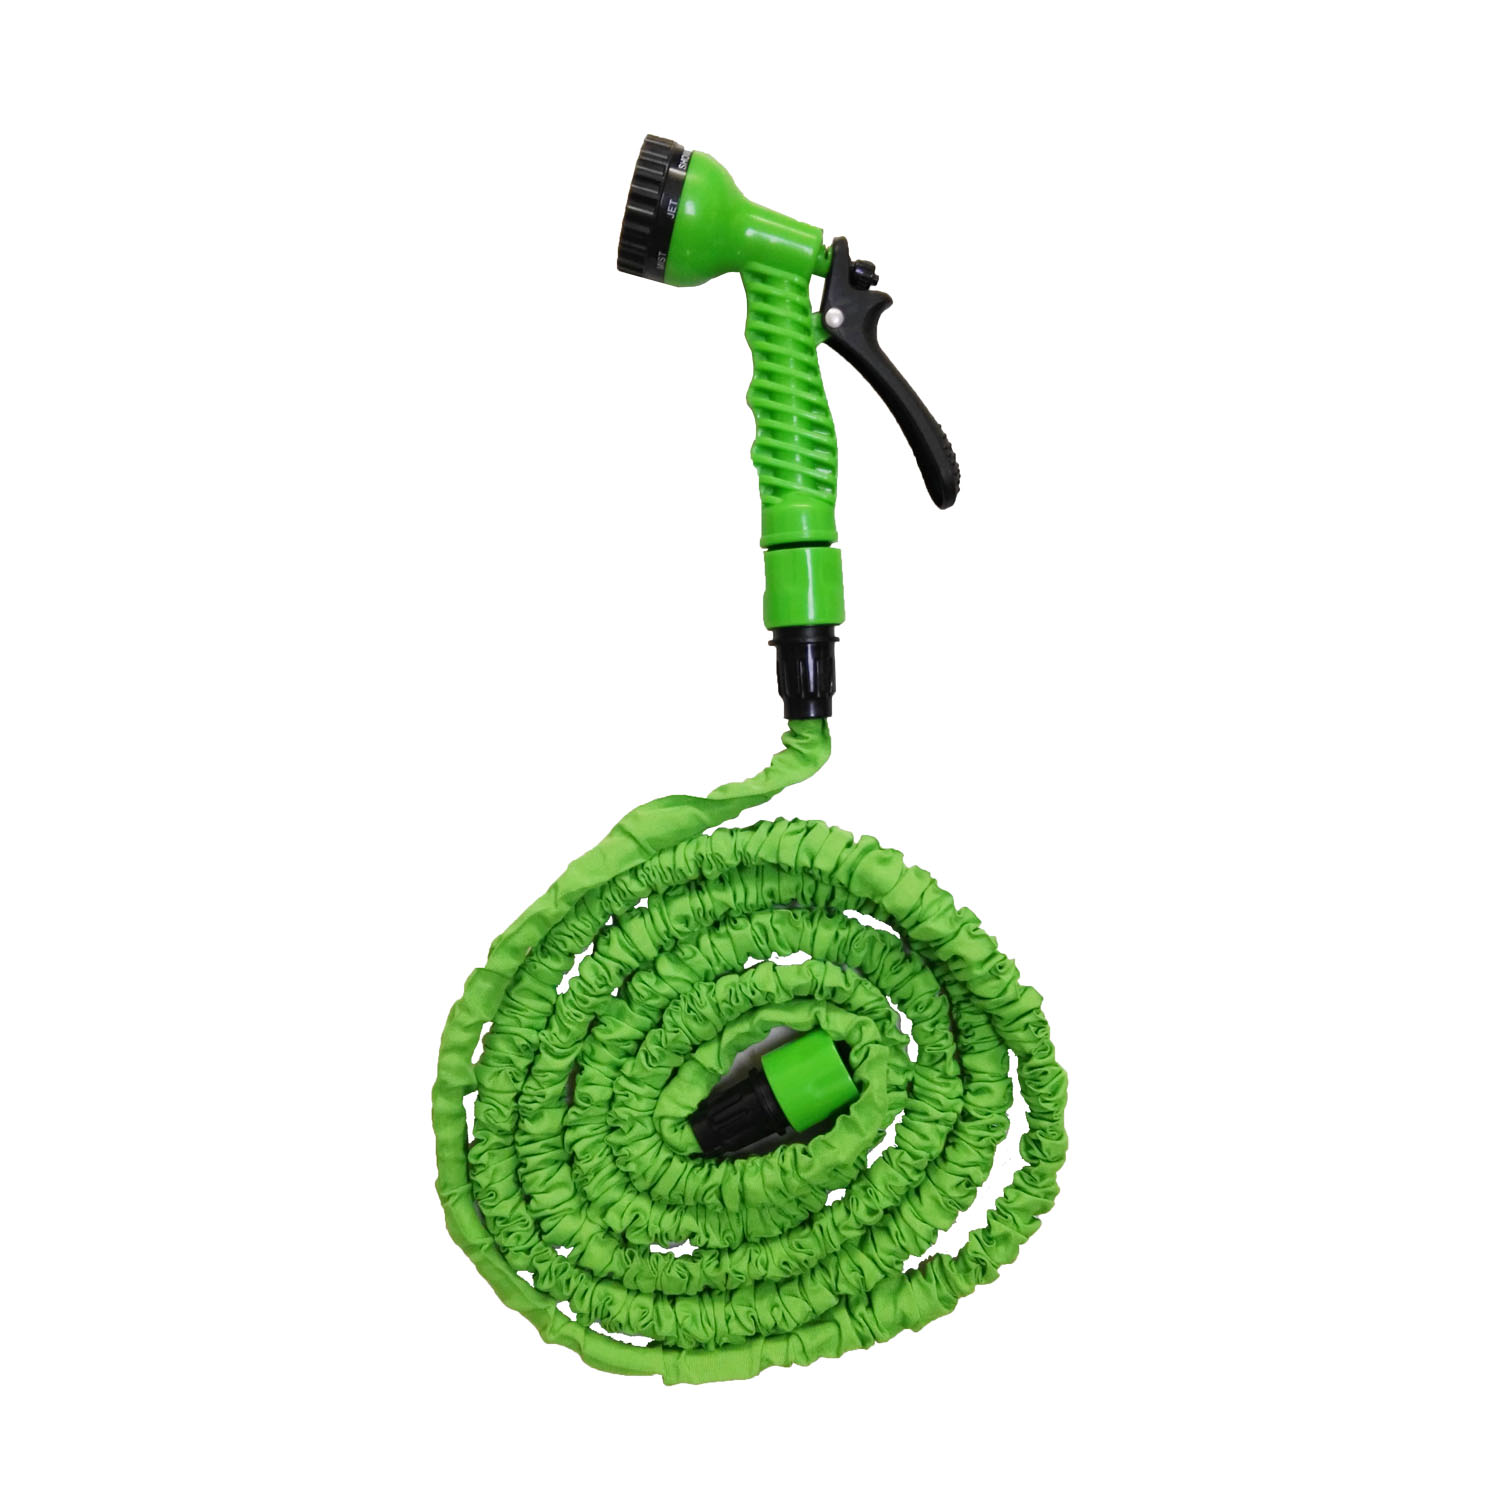 GL-AAA1126 25 Feet Expandable Garden Hose with 7 Pattern Sprayer Nozzle